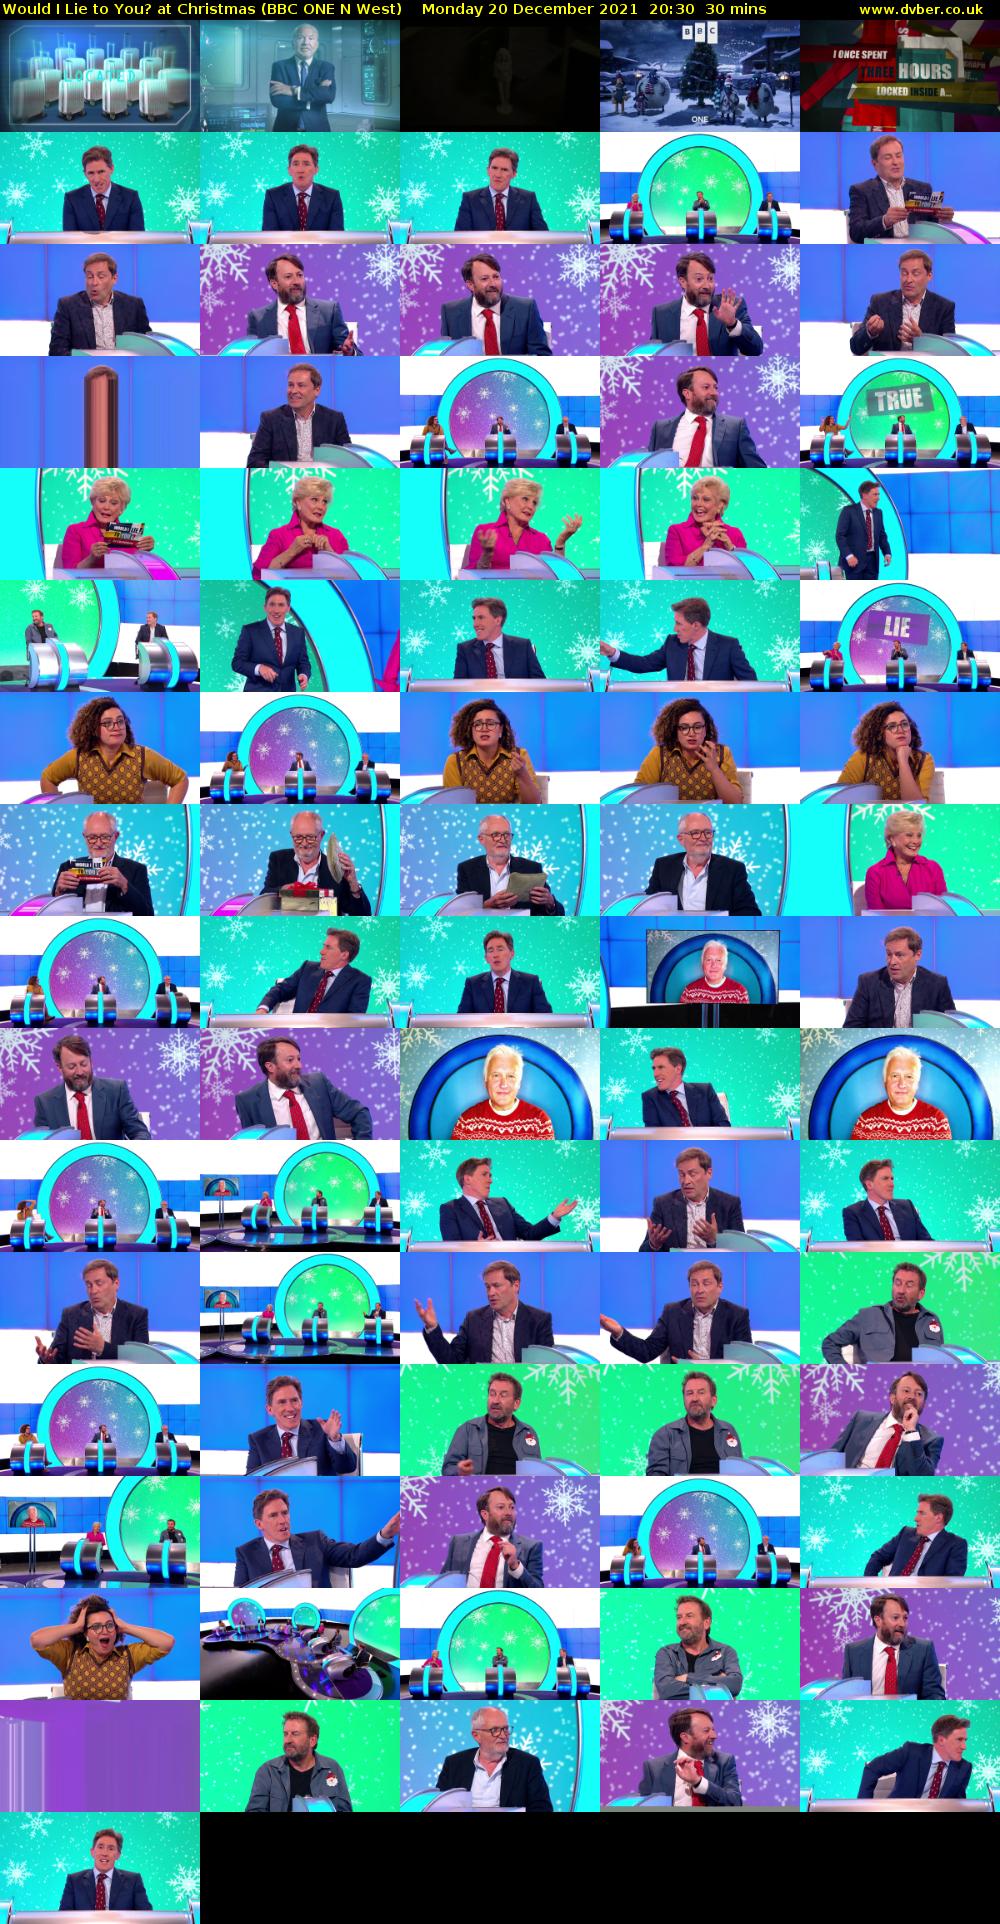 Would I Lie to You? at Christmas (BBC ONE N West) Monday 20 December 2021 20:30 - 21:00